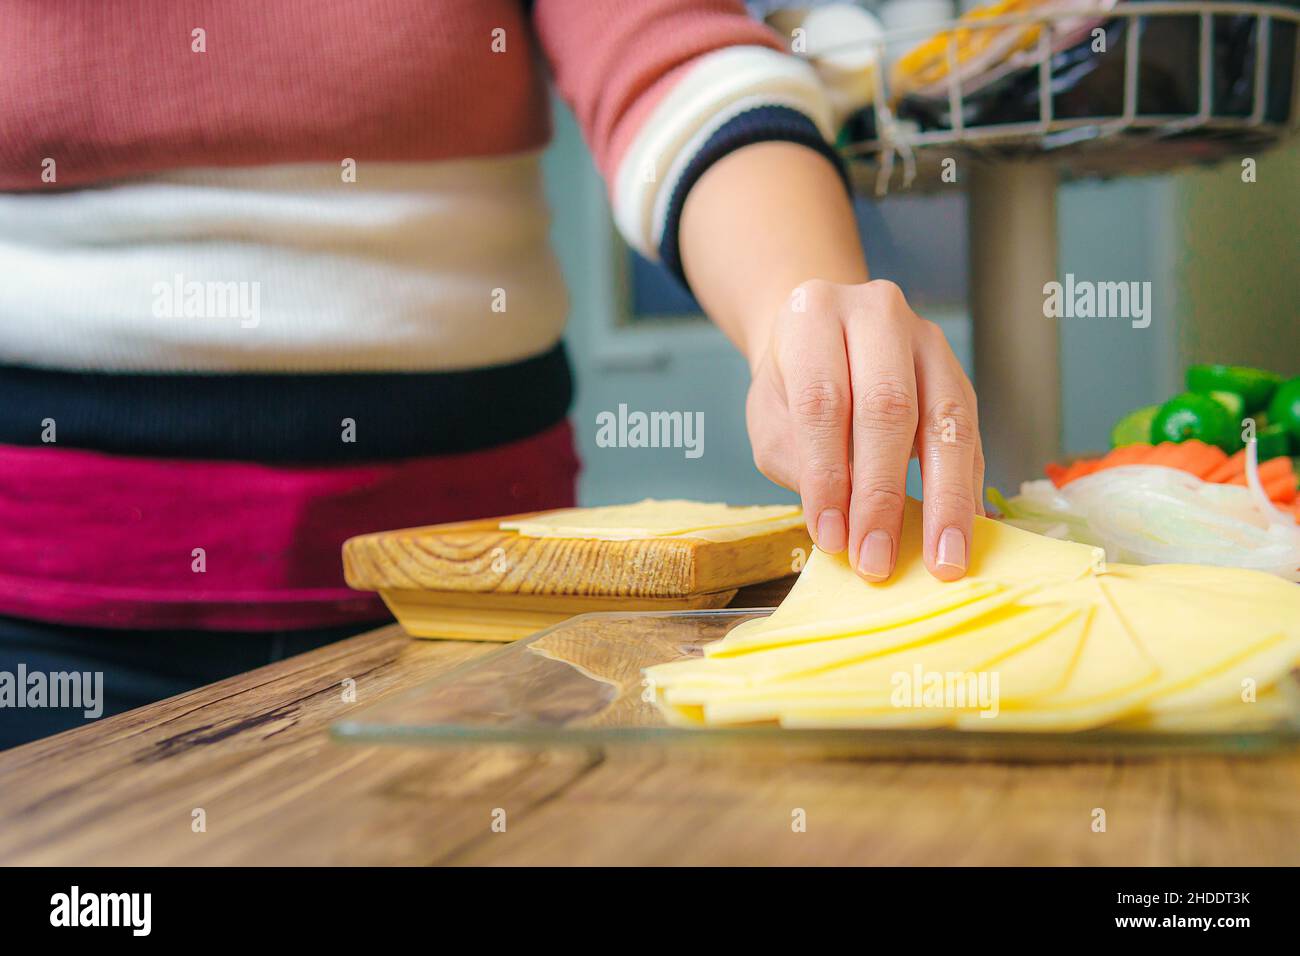 On the table there are slices of yellow cheese, a woman's hand can be seen taking a slice to arrange it or to eat. Stock Photo